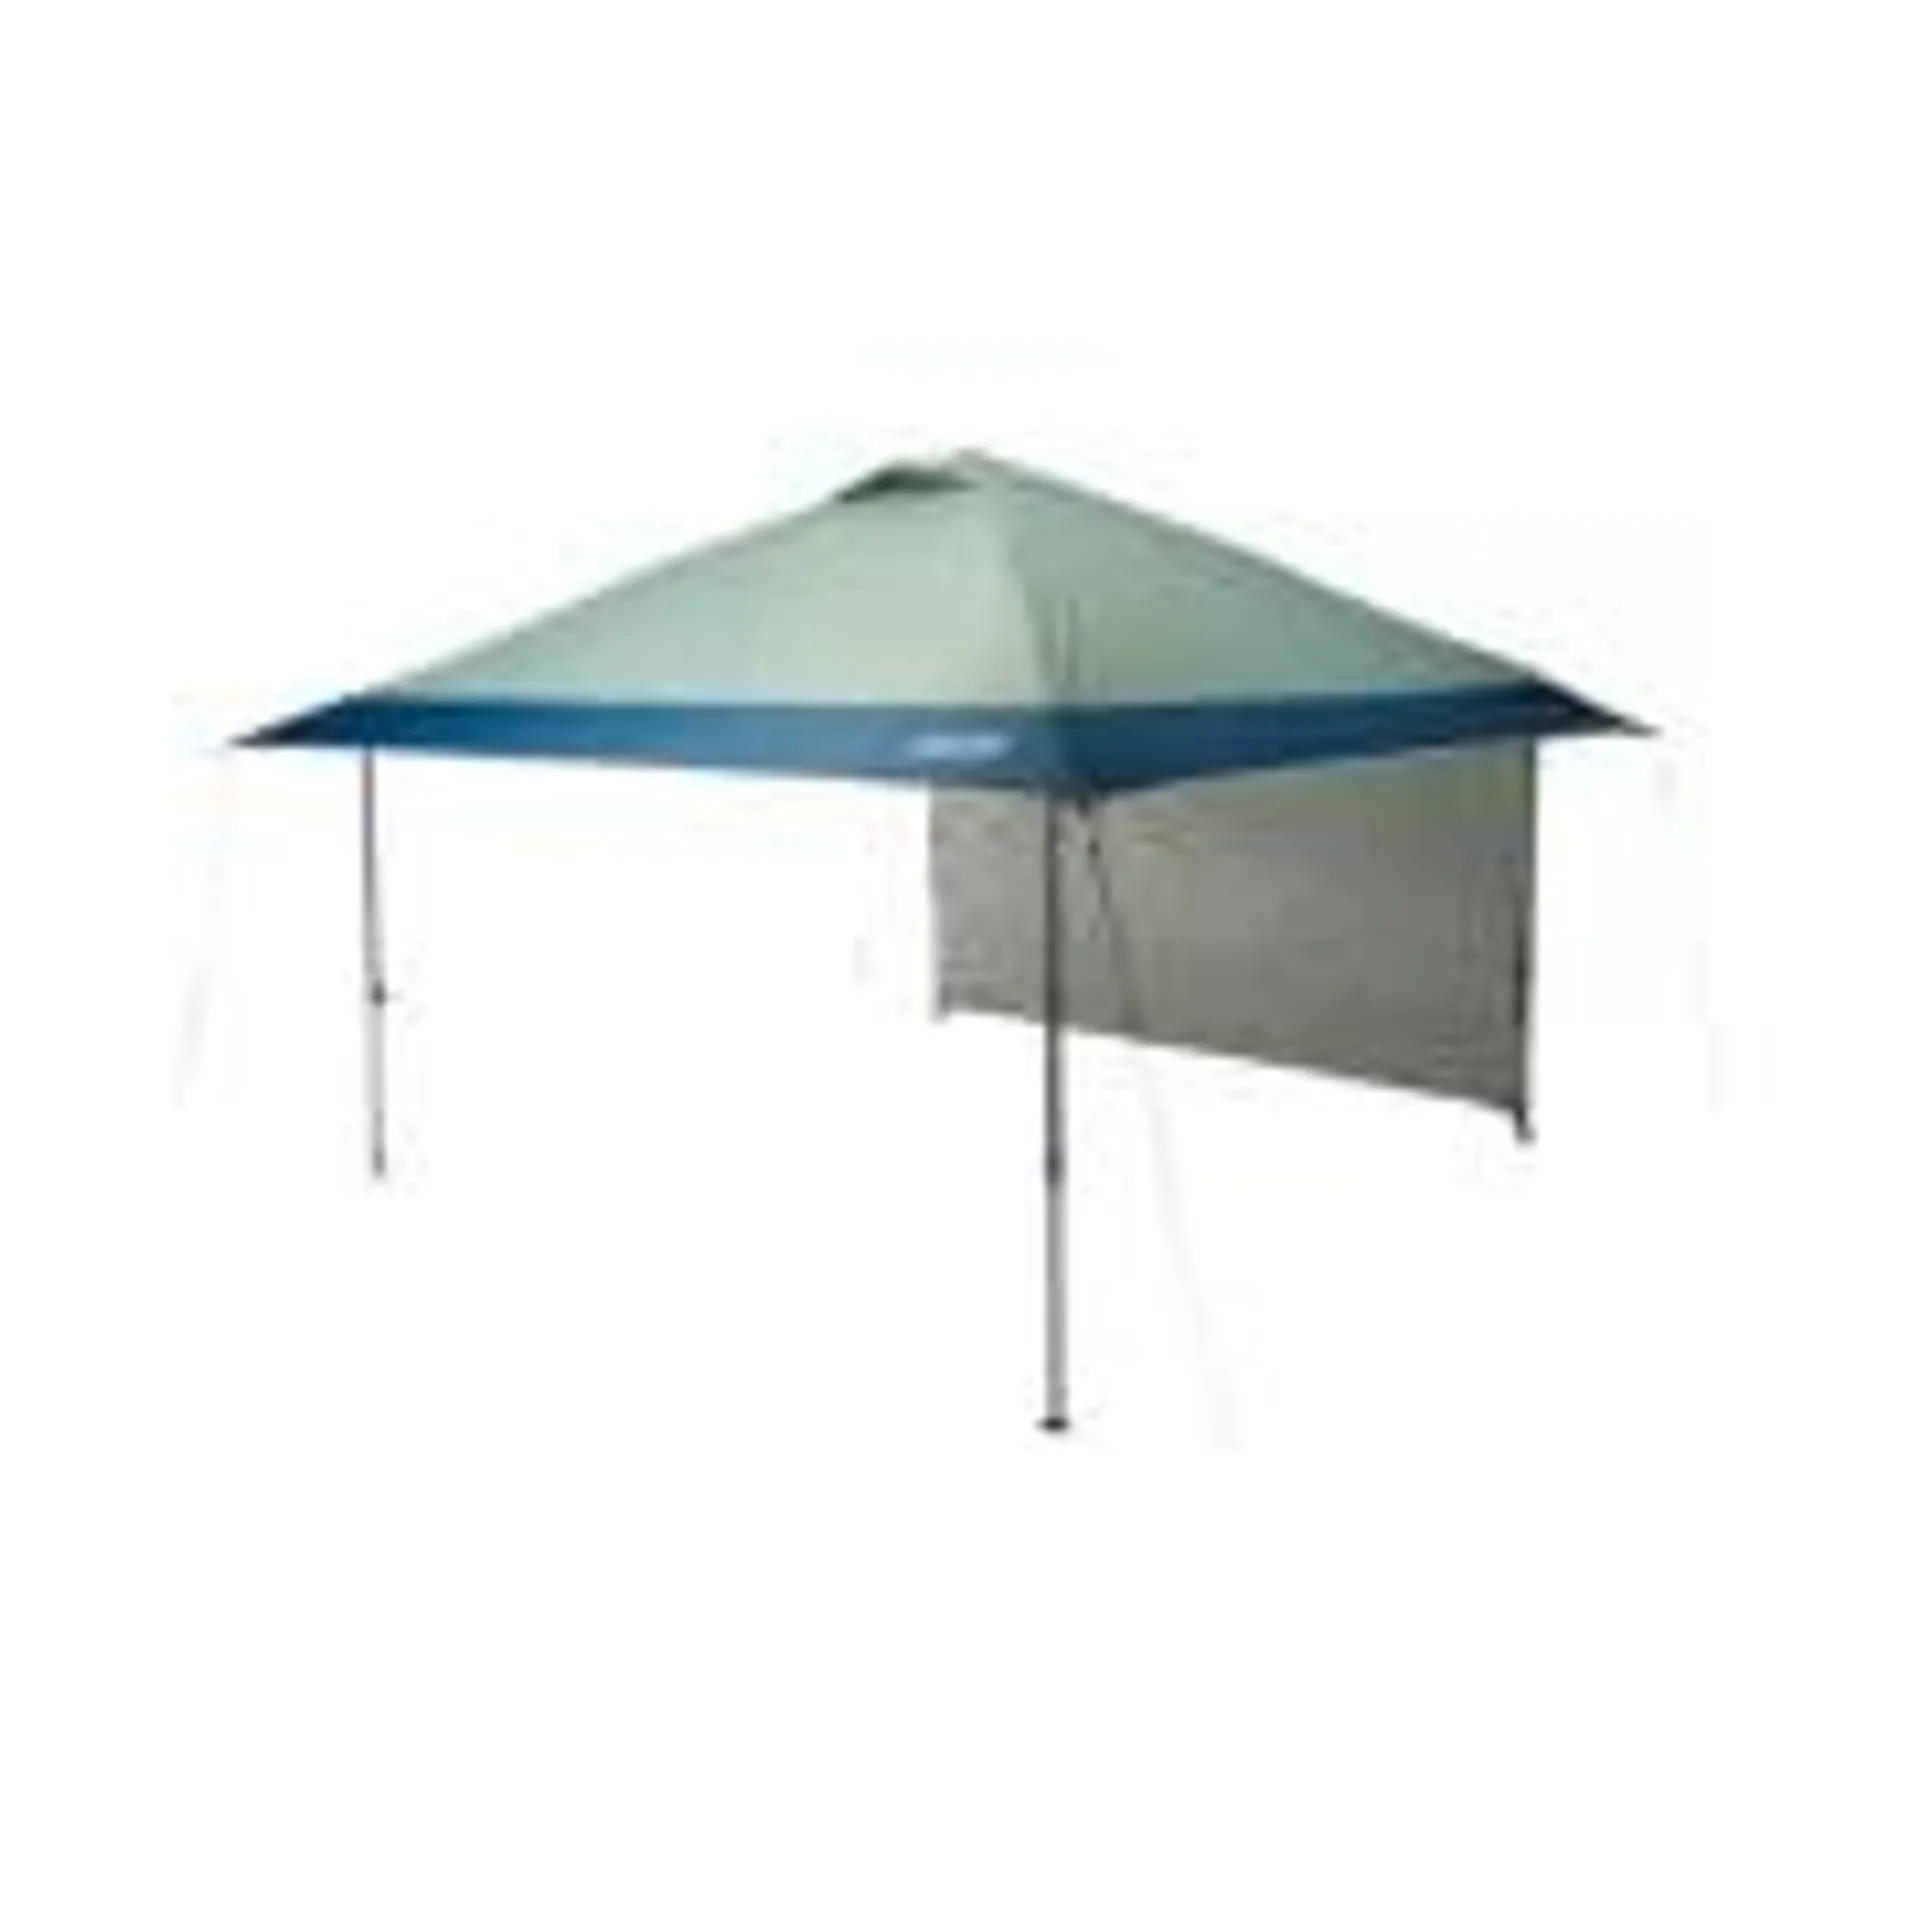 OASIS™ 10 x 10 Canopy with Sun Wall